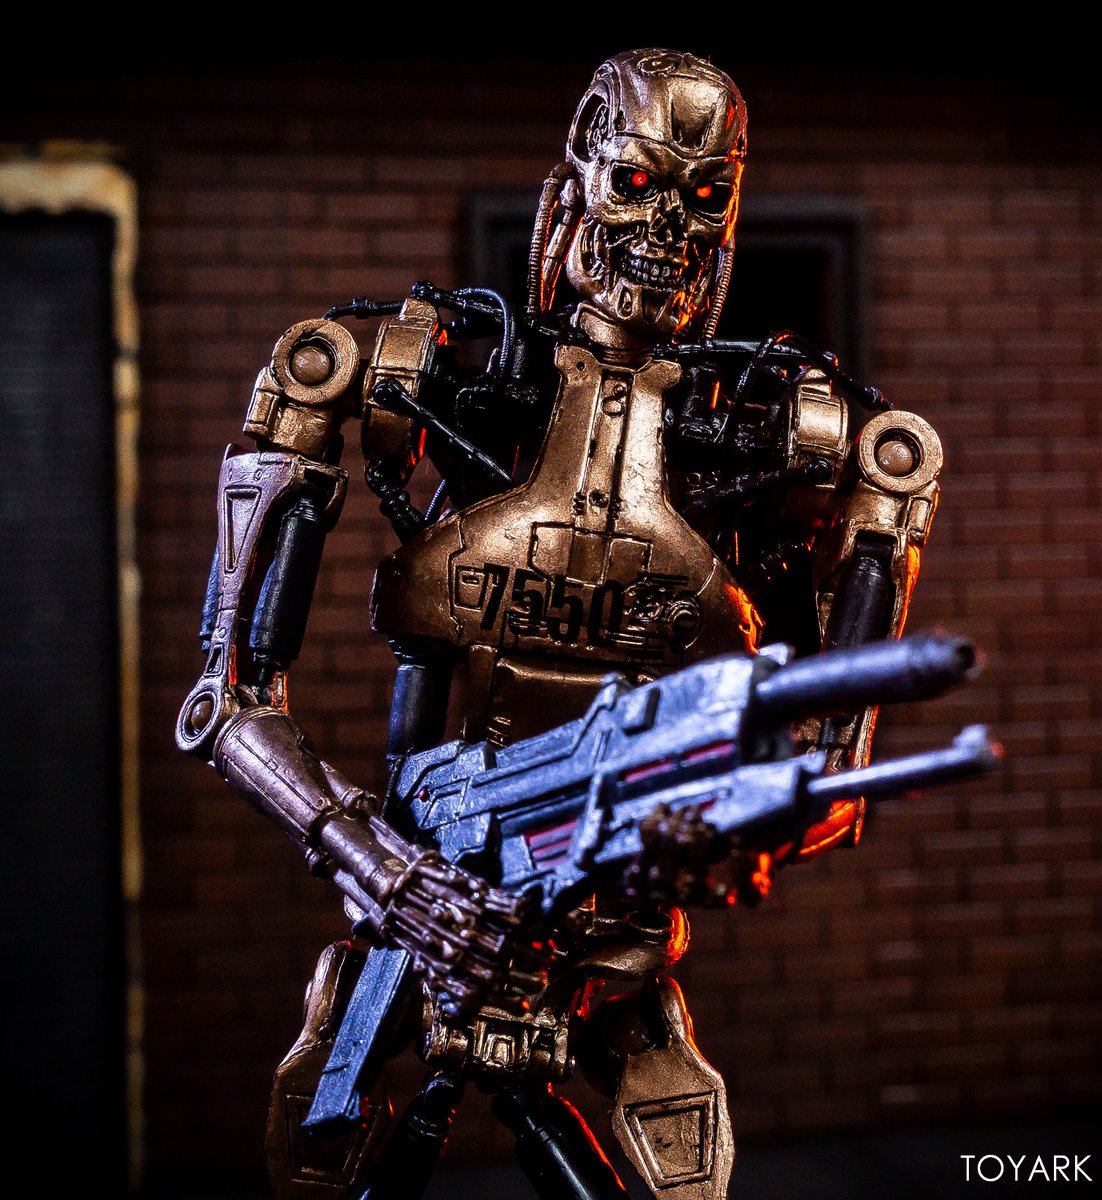 The Toyark In Our Newest Photo Gallery We Take A Look At The Excellent Neca Toys Kenner Tribute Terminator 2 Figures See Over 70 Photos Here T Co Tzkvim8jt9 T Co Jjfc7gdqrc